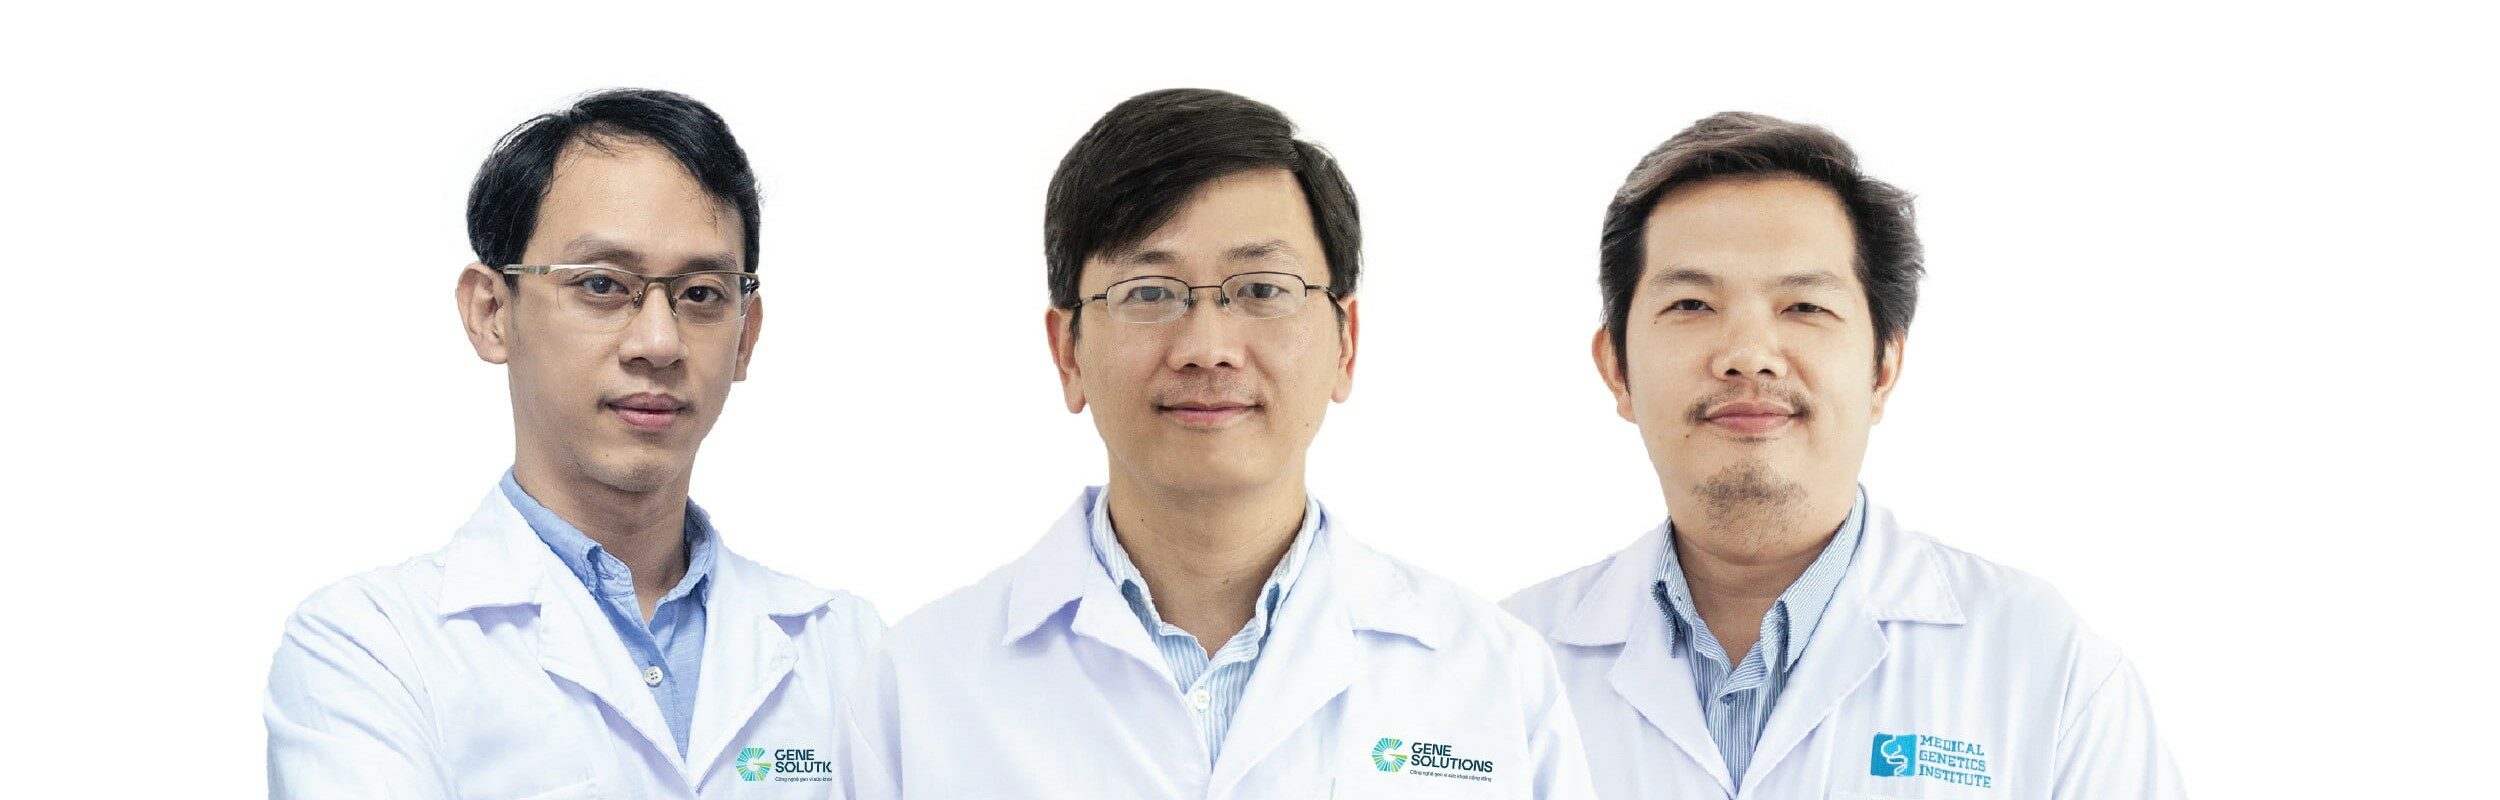 Gene Solutions: How an initially risky investment became one of Vietnam’s first successful biotechnology companies and expanded throughout Southeast Asia